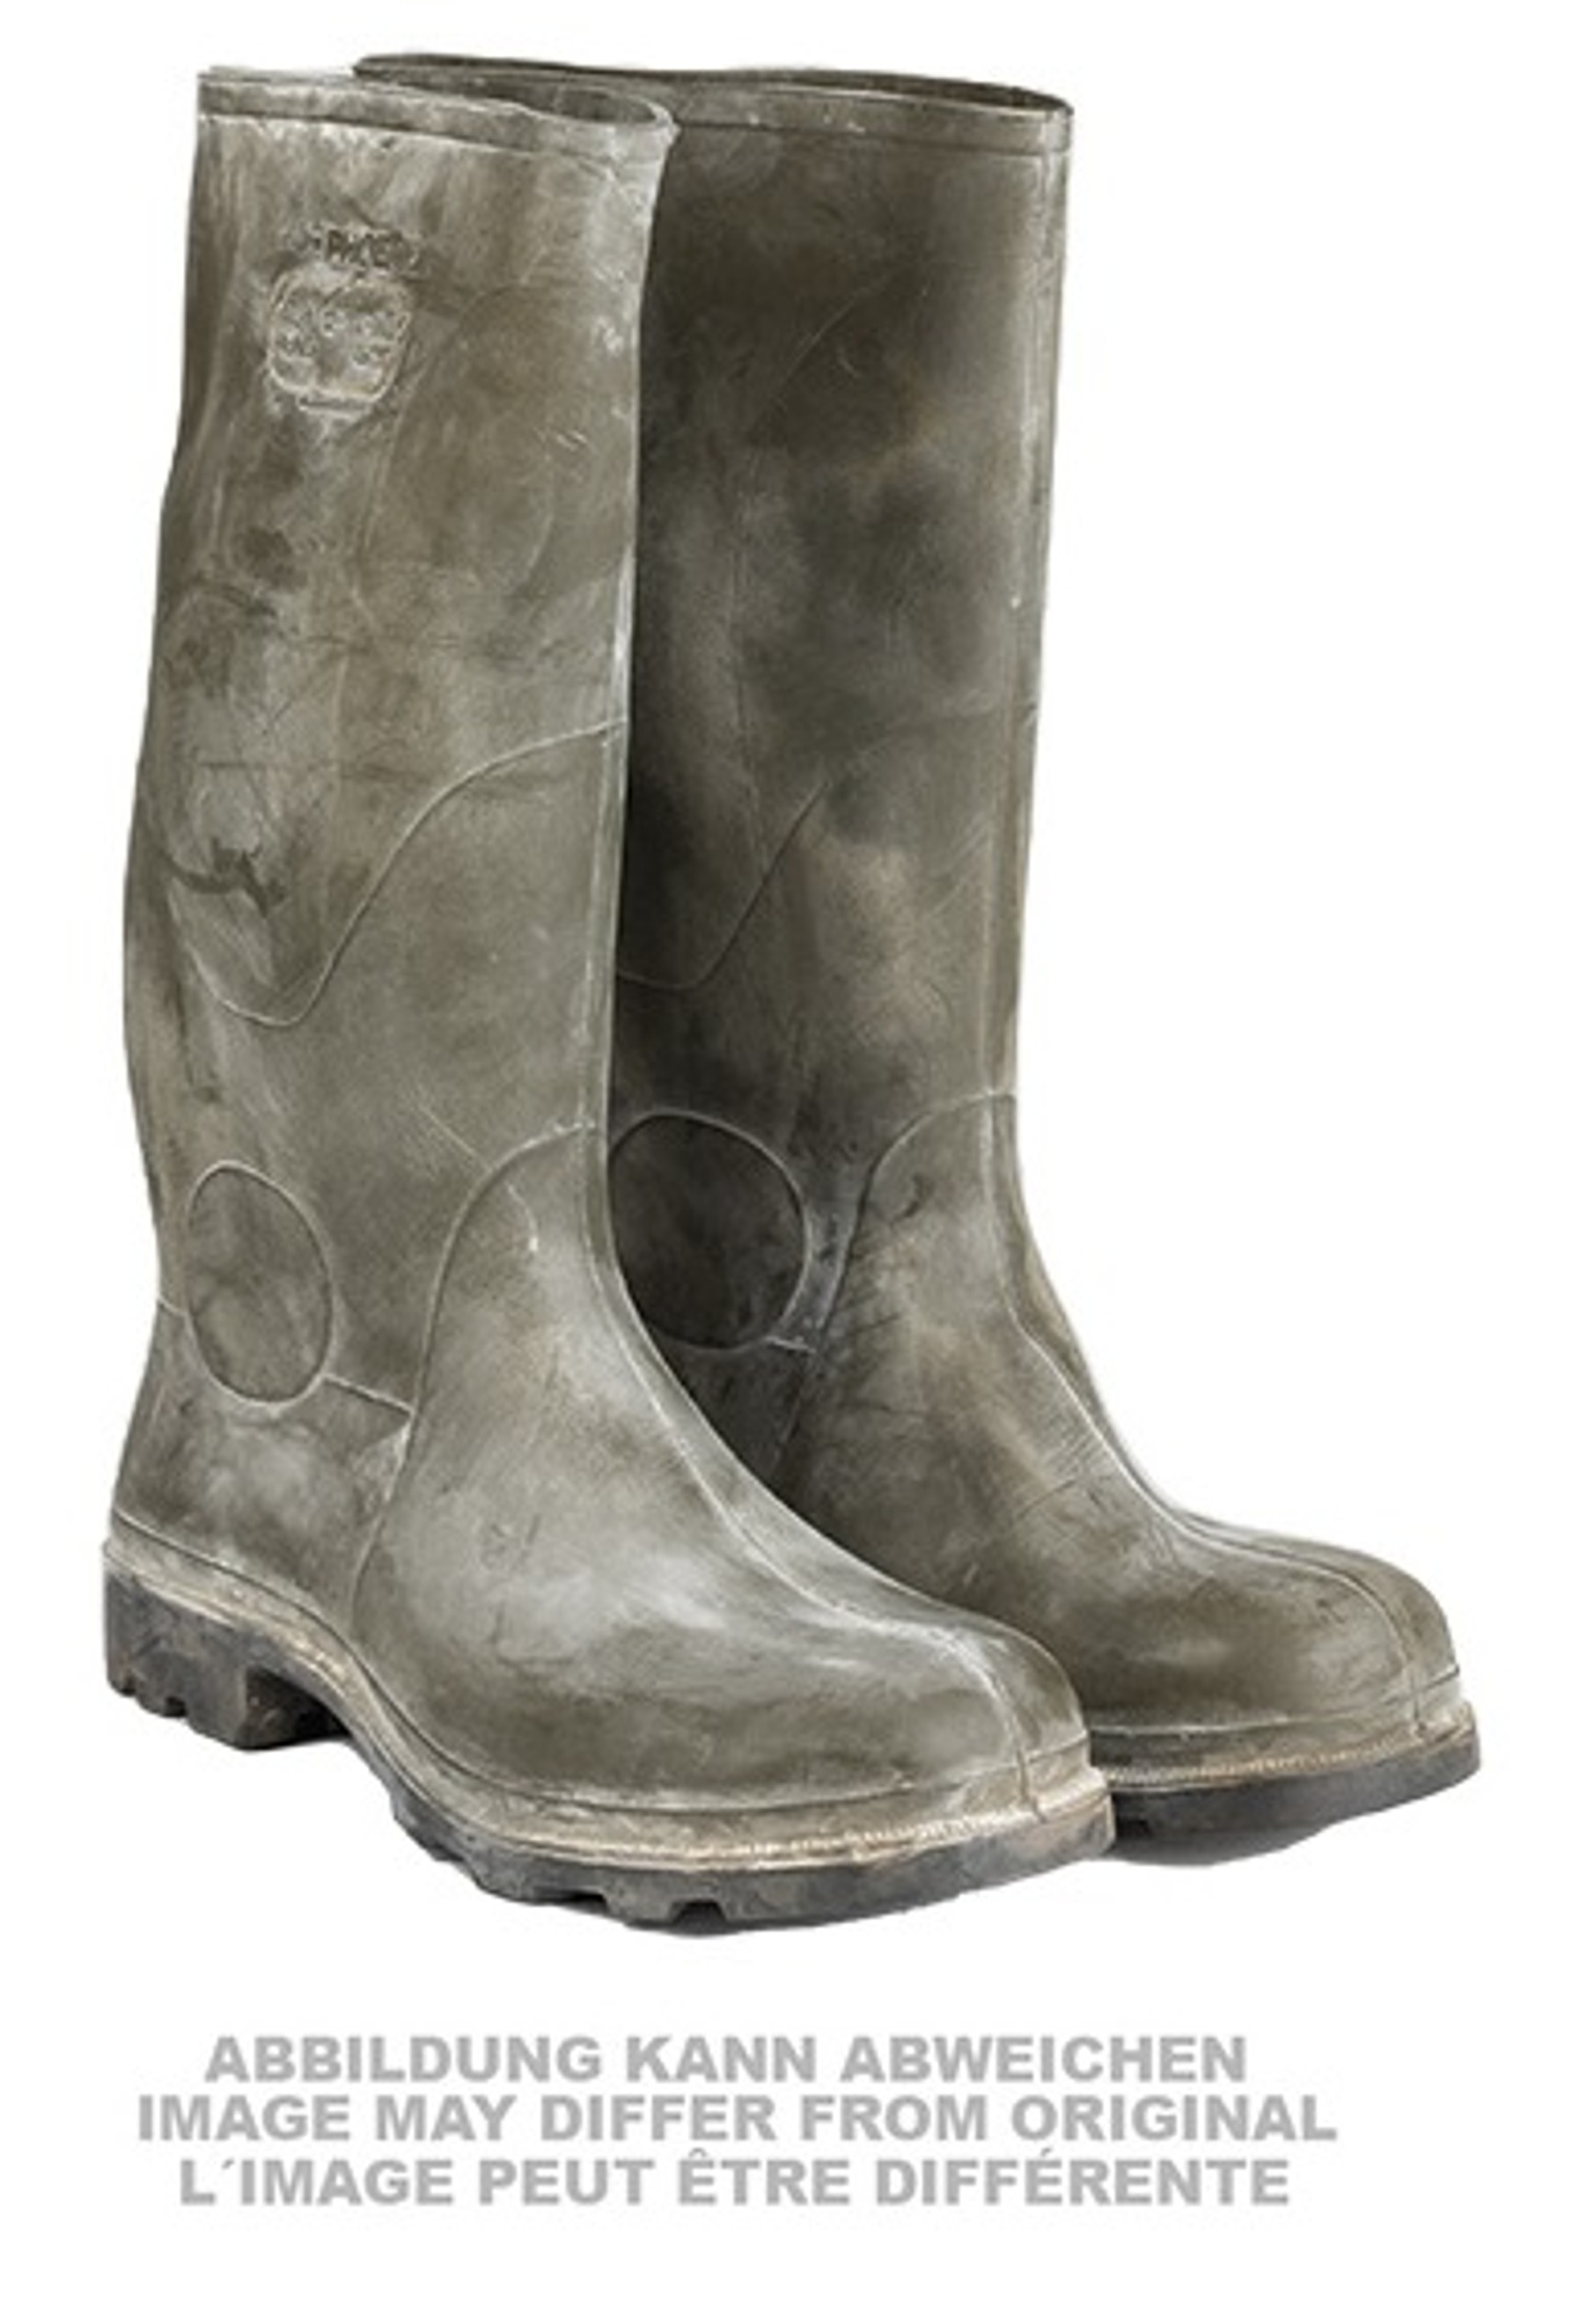 German OD NBC Rubber Boots